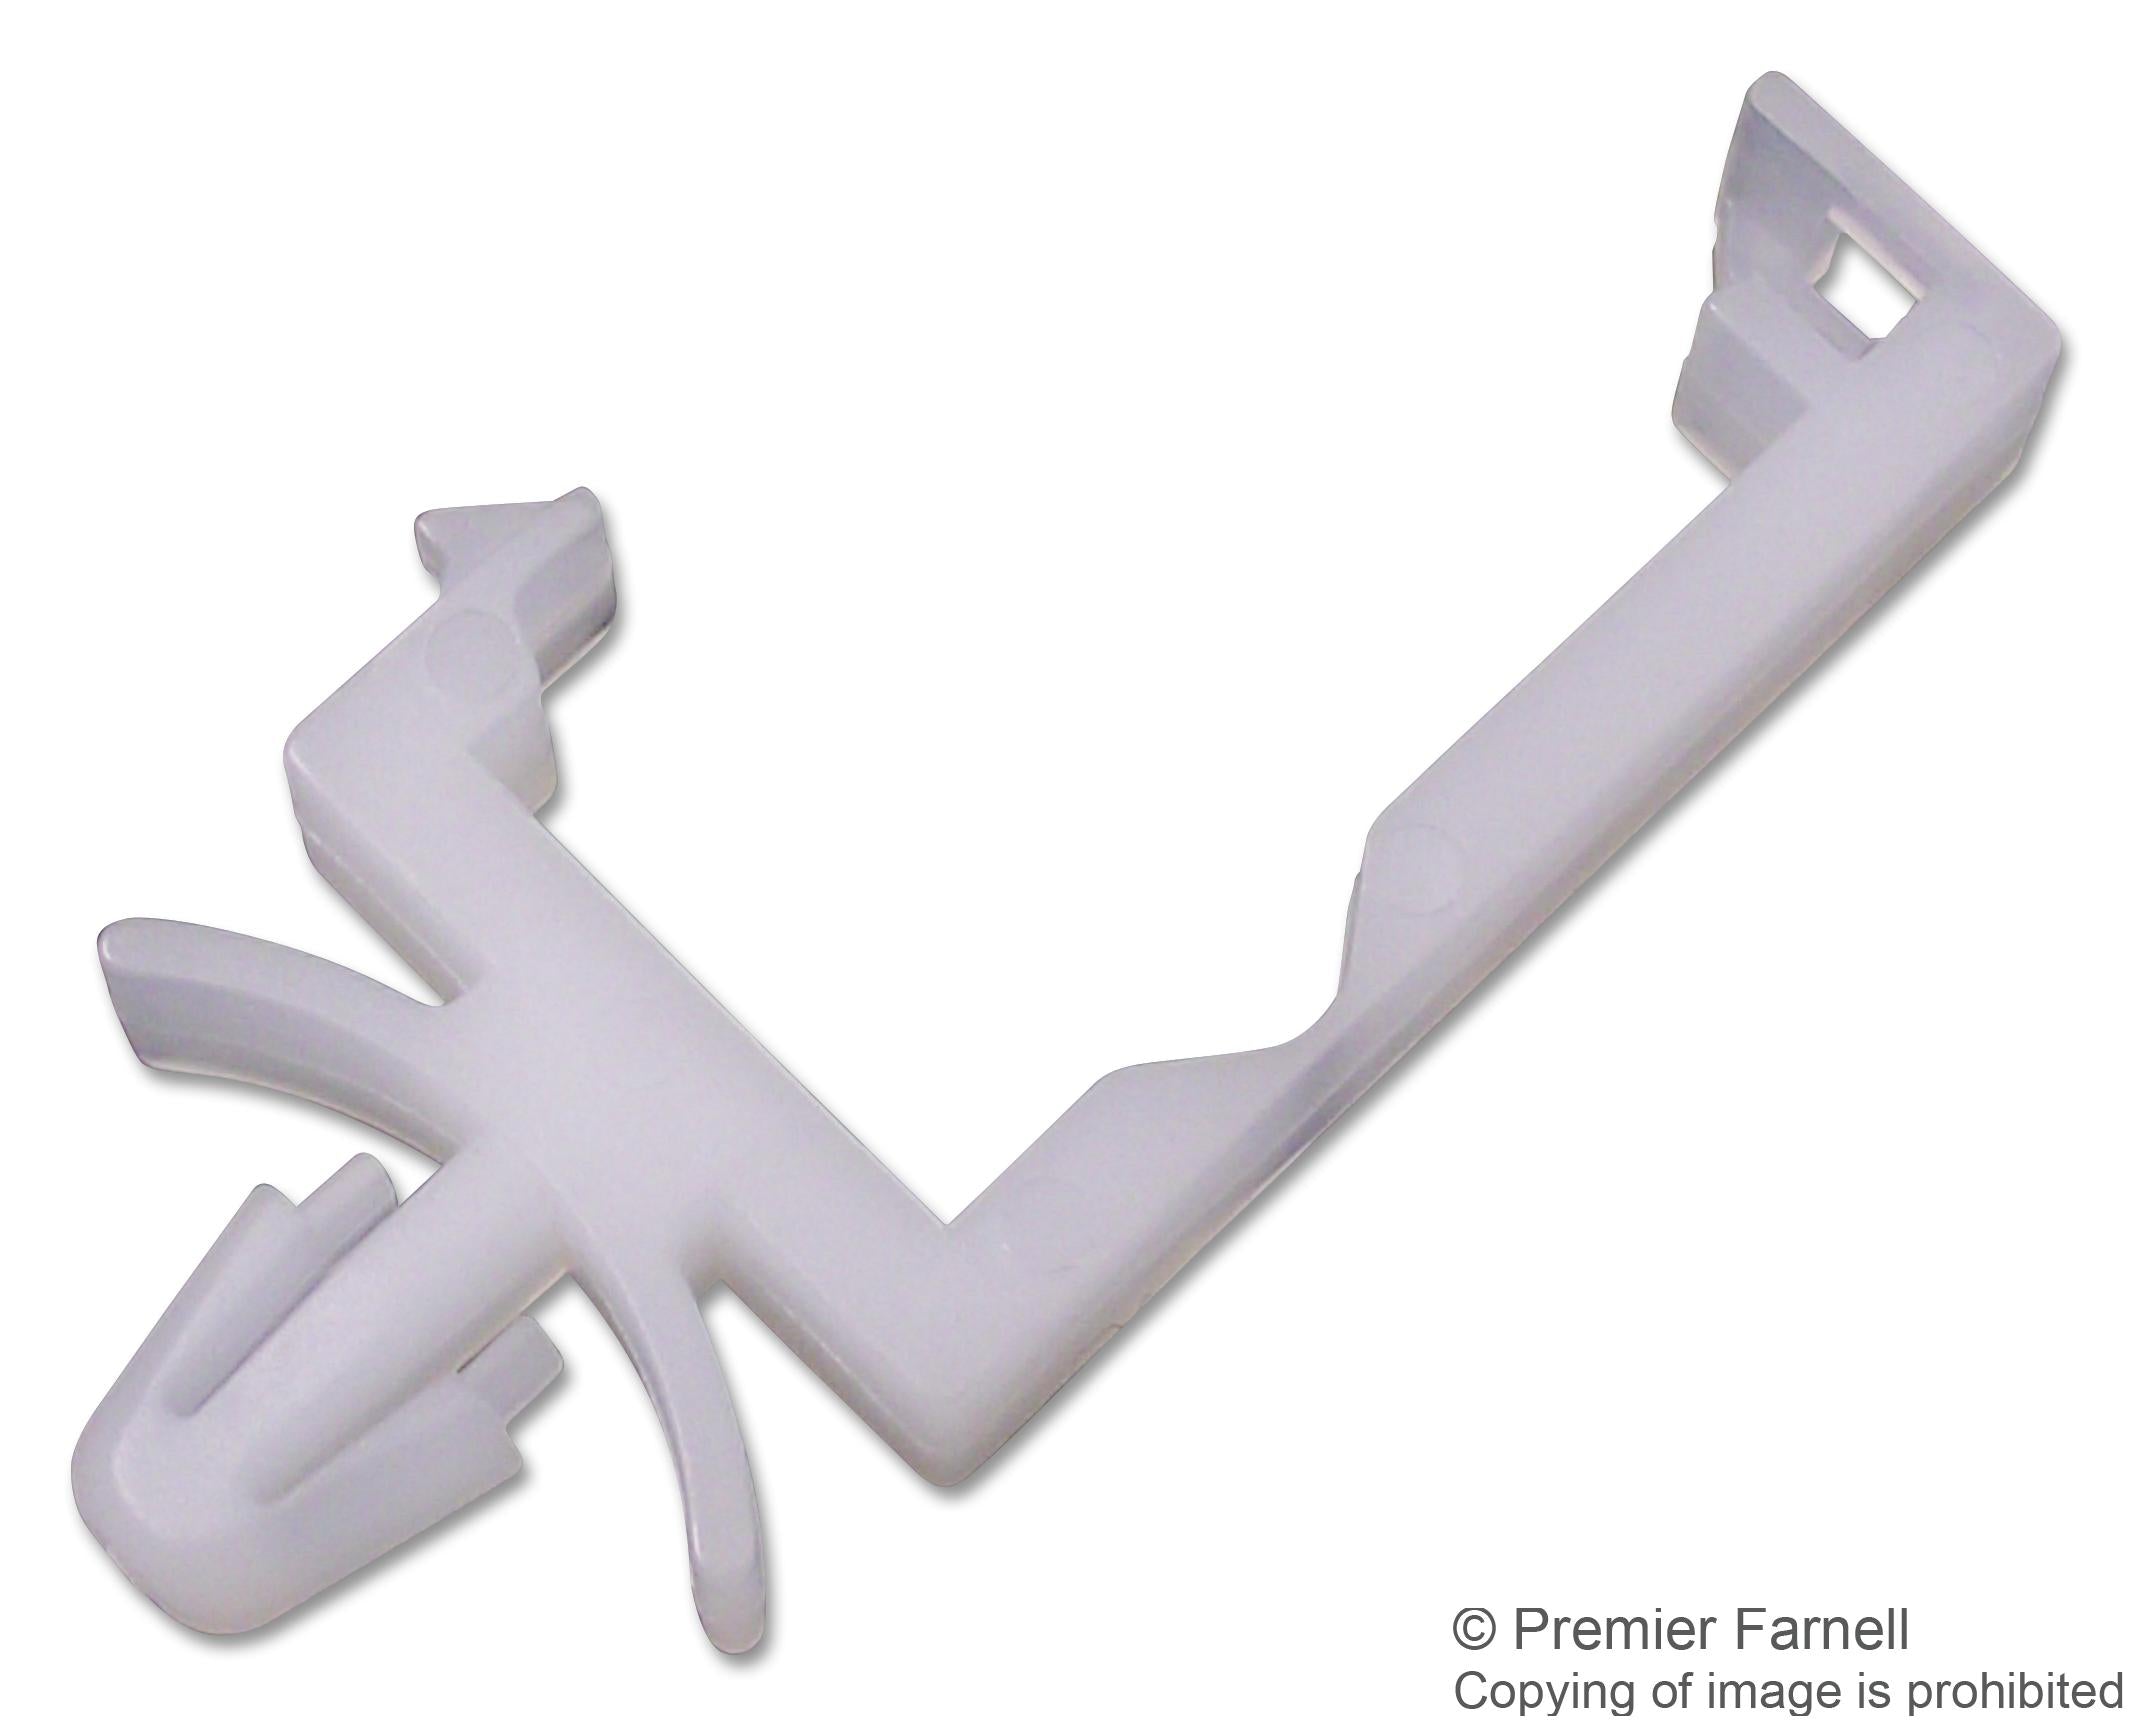 TRWSLT-01A-01 CABLE CLAMP, NYLON 6.6, 10.6MM, PK50 TR FASTENINGS